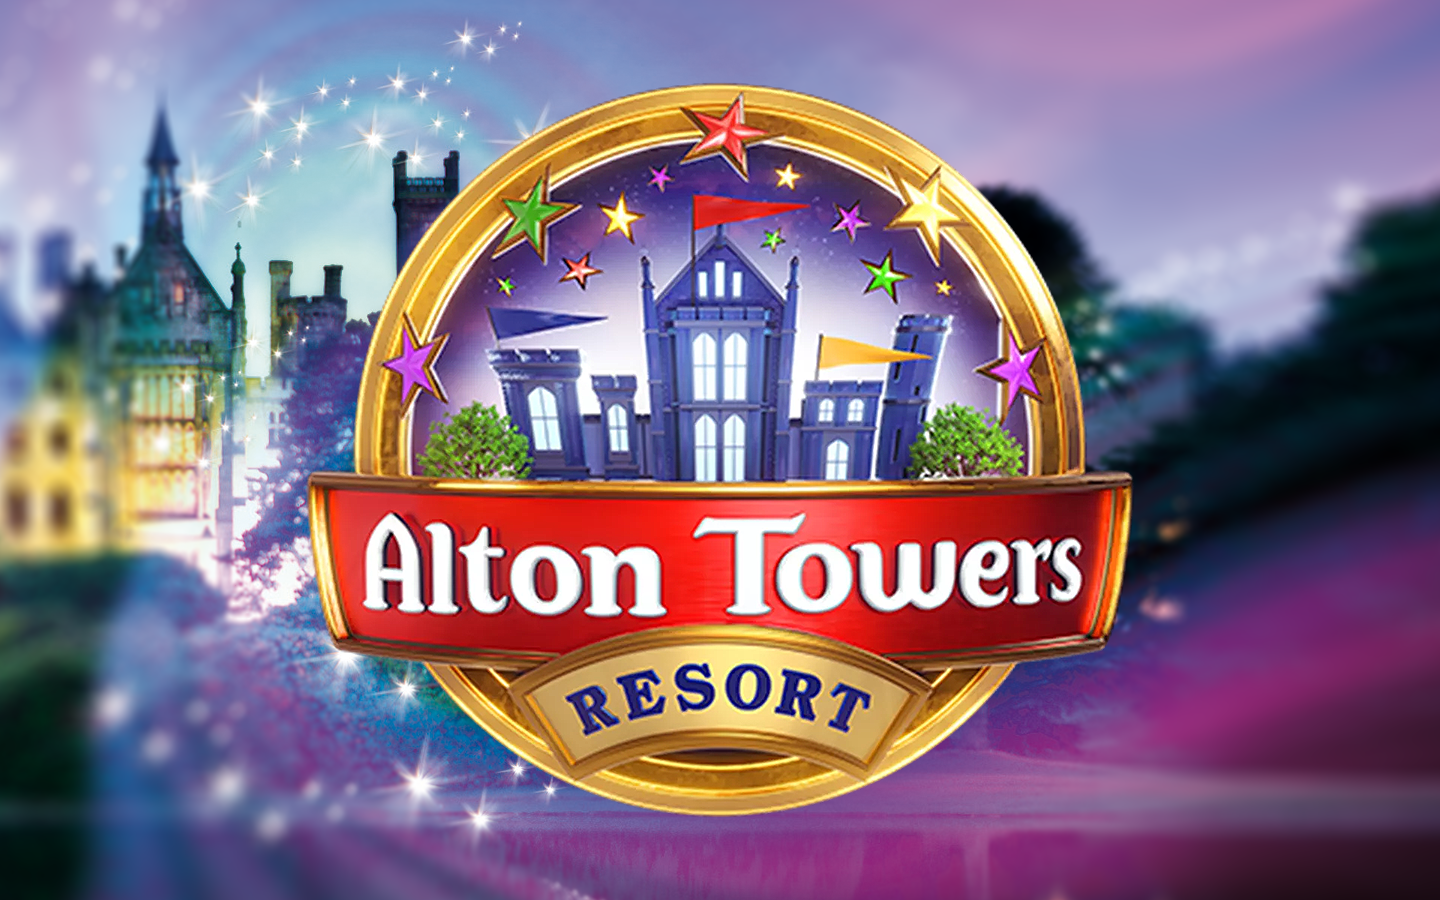 Blurred image of The Towers with magical swirls superimposed with Alton Towers Resort logo.